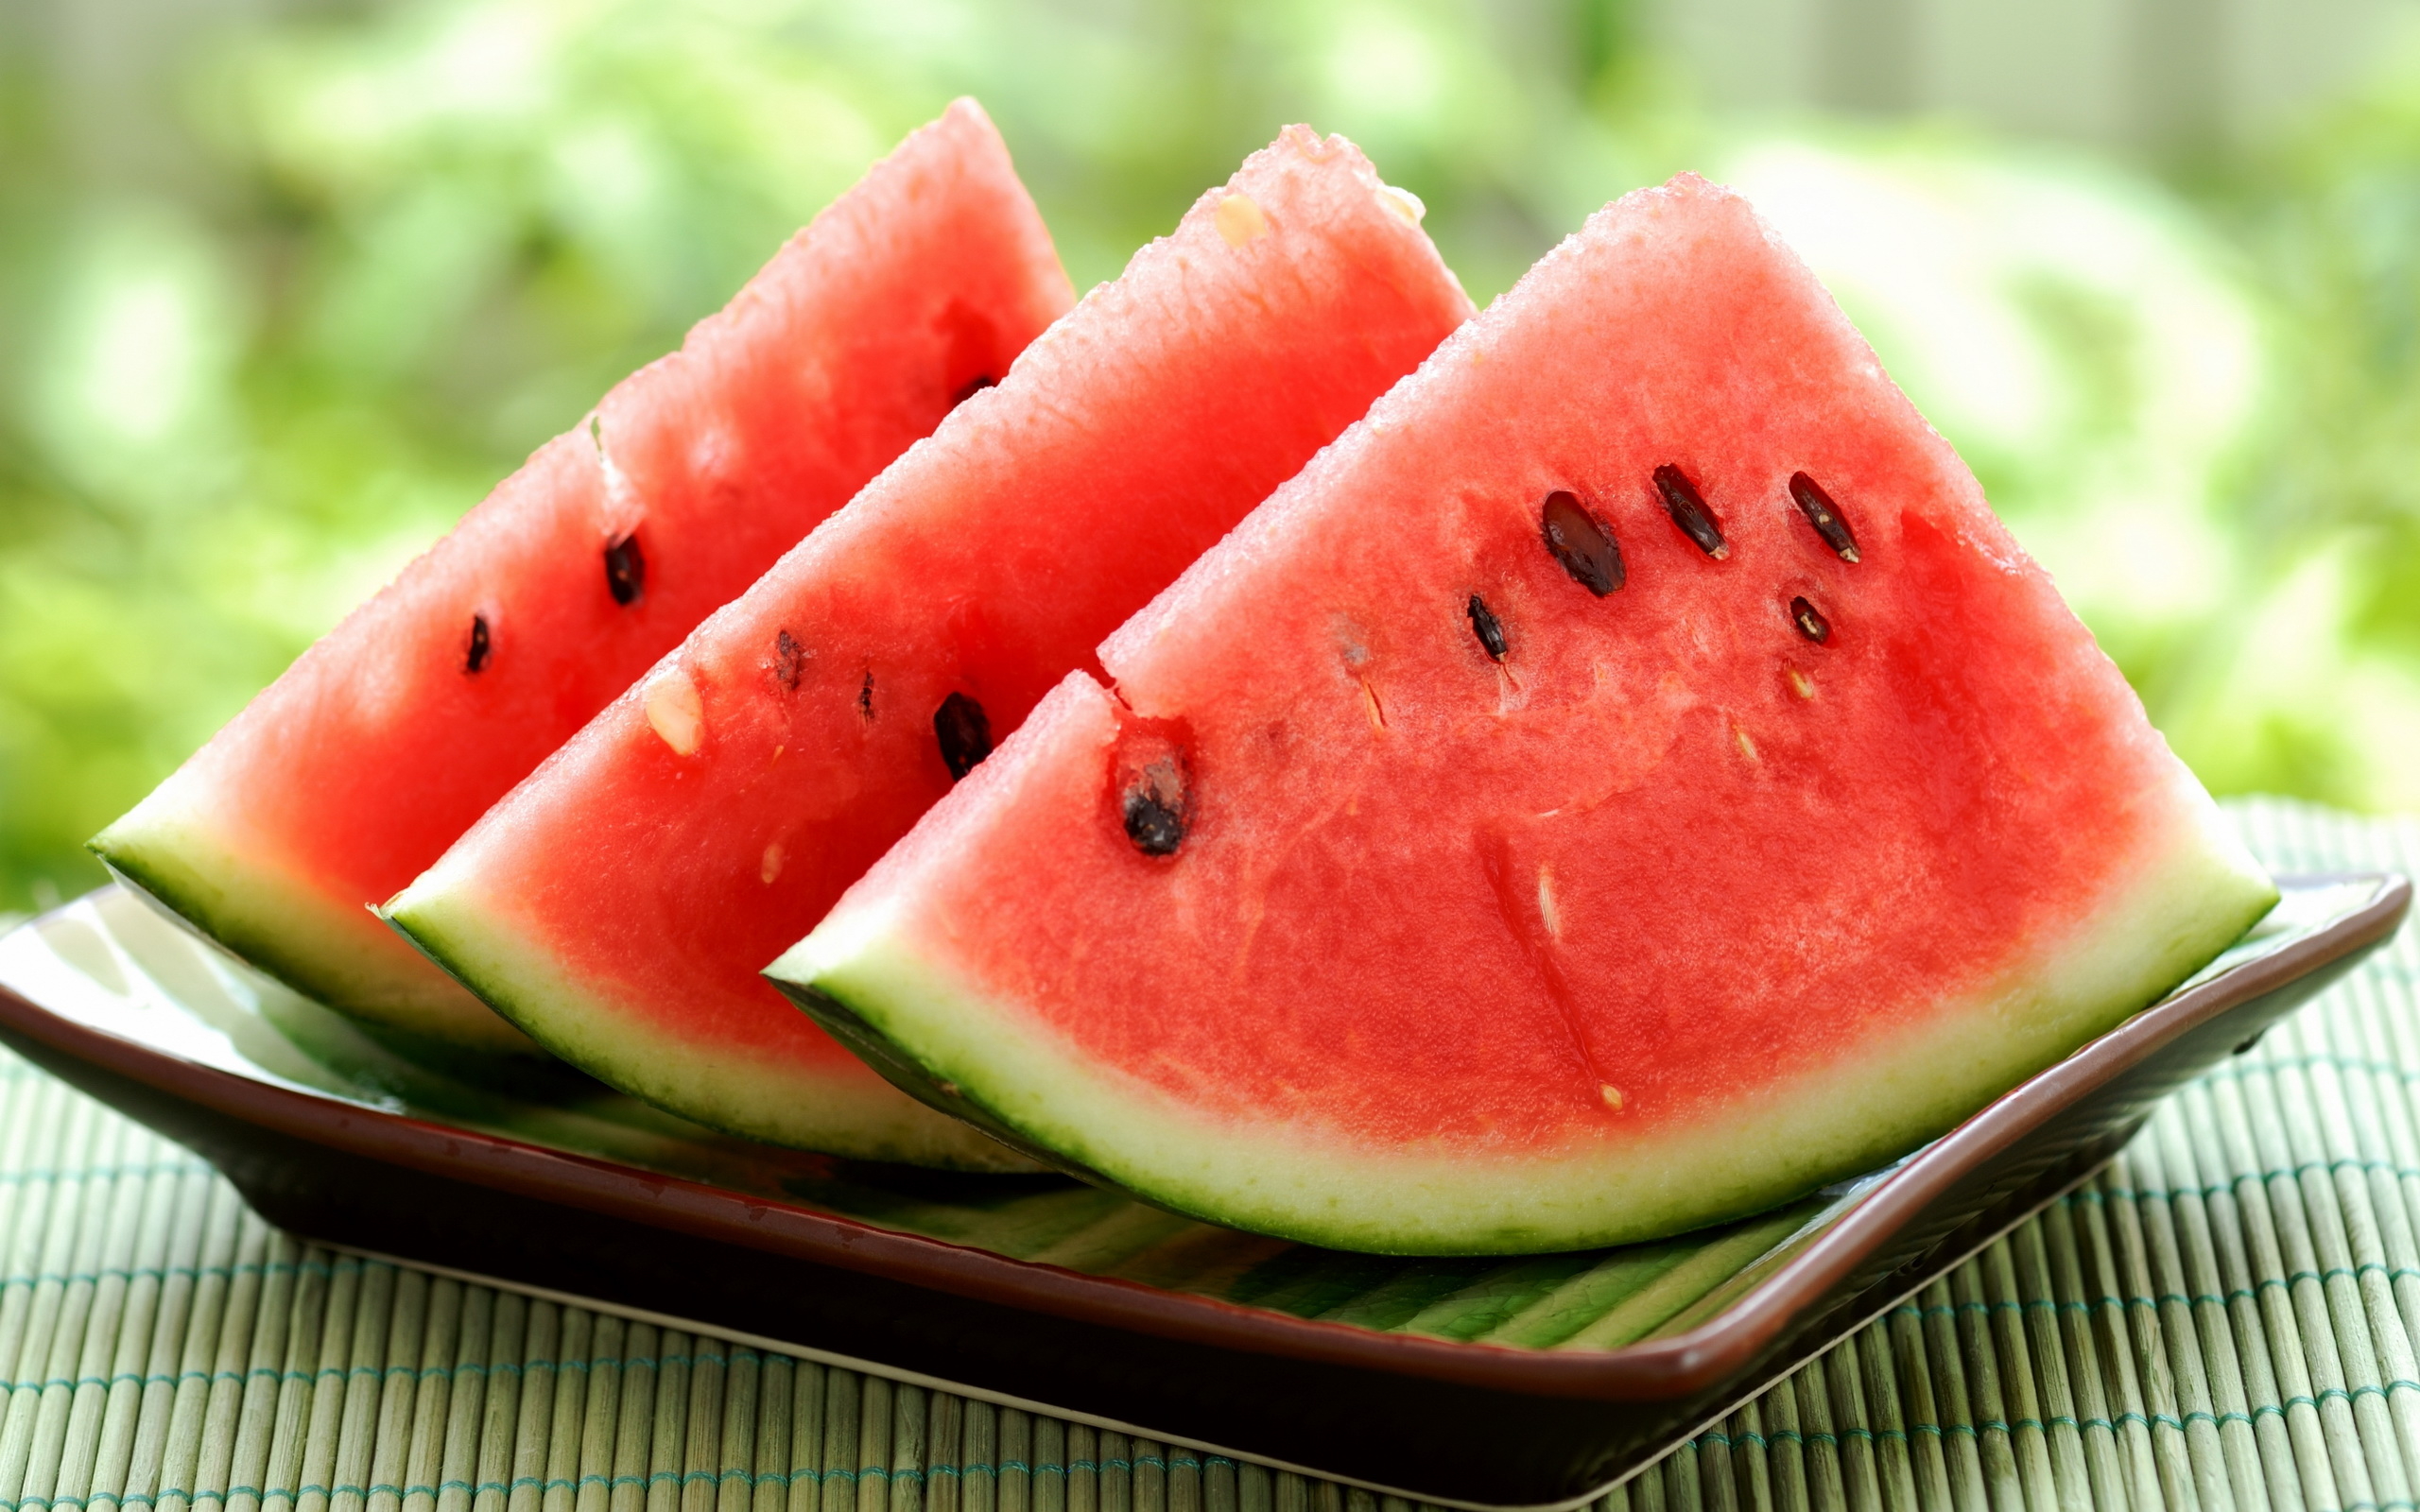 How to choose a watermelon?